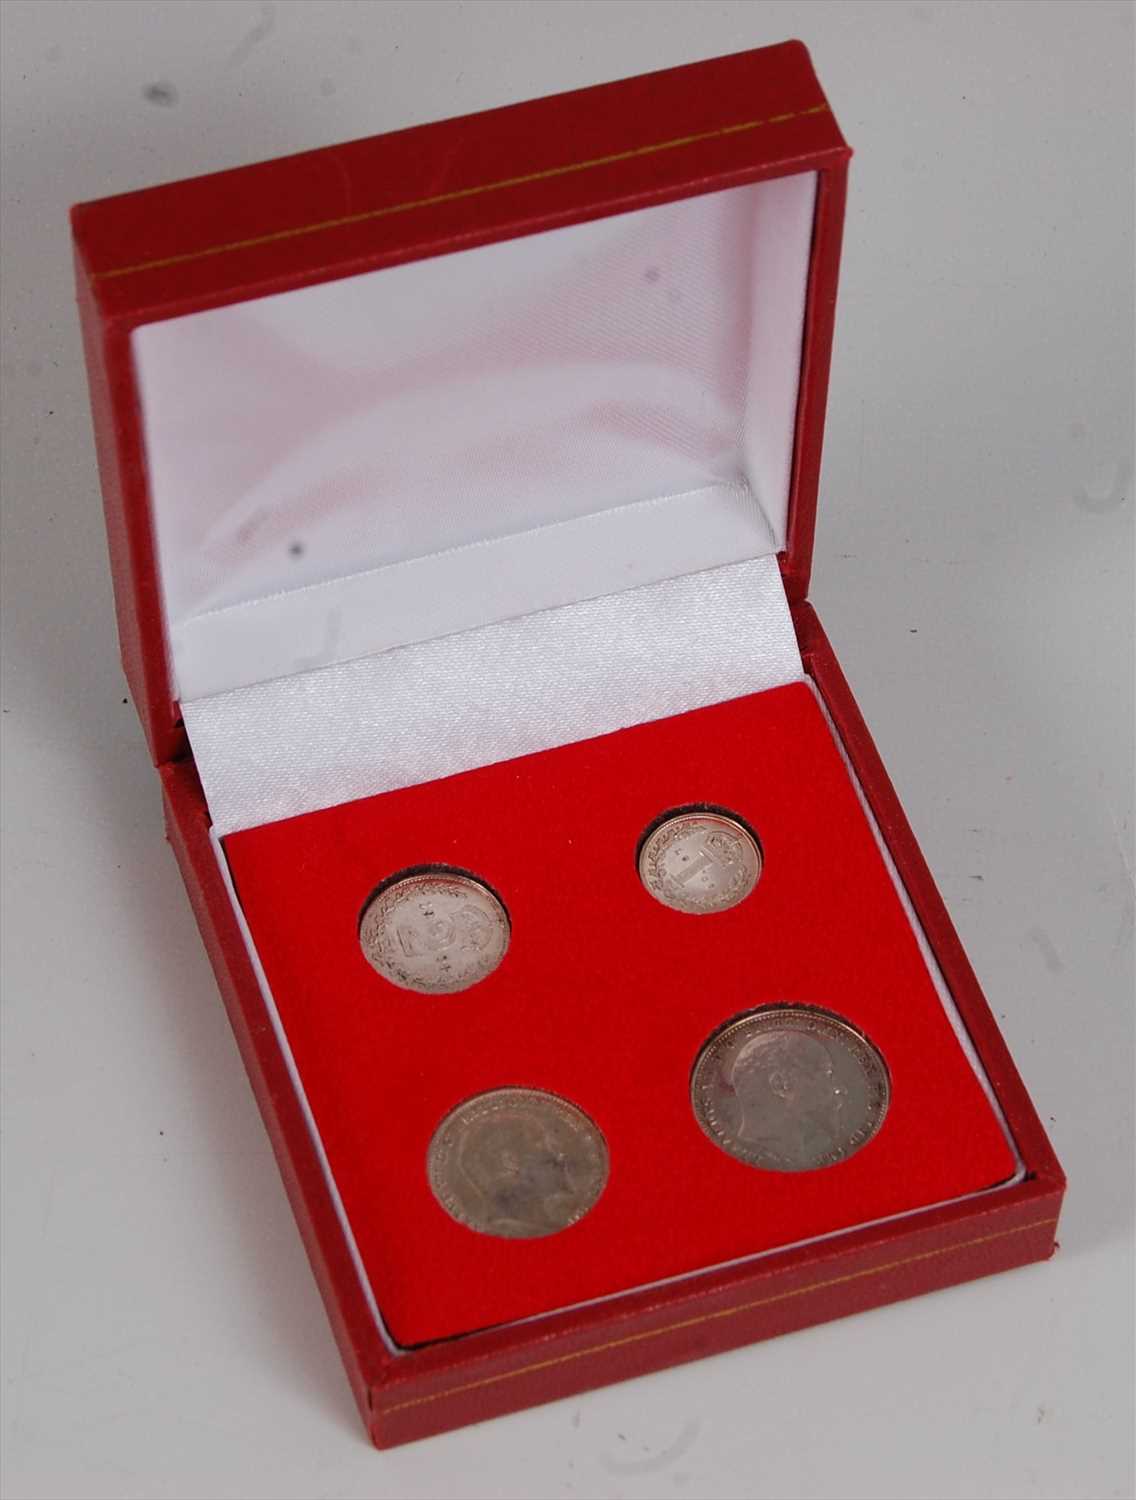 Lot 33 - Great Britain, 1908 Maundy Money four coin set